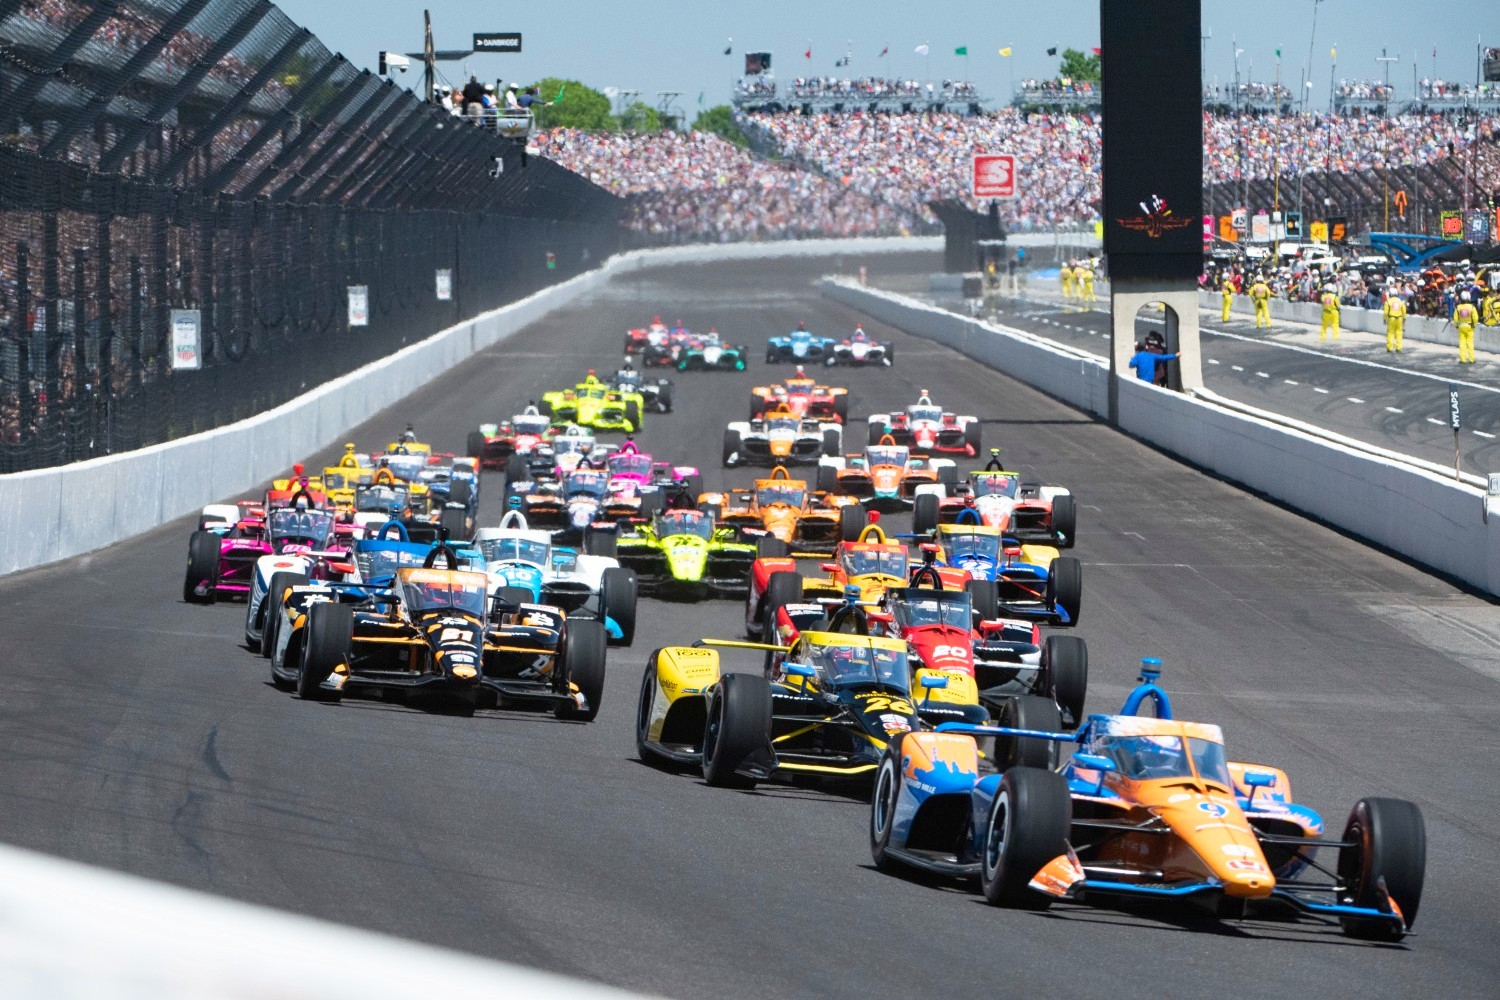 indy 500 2022